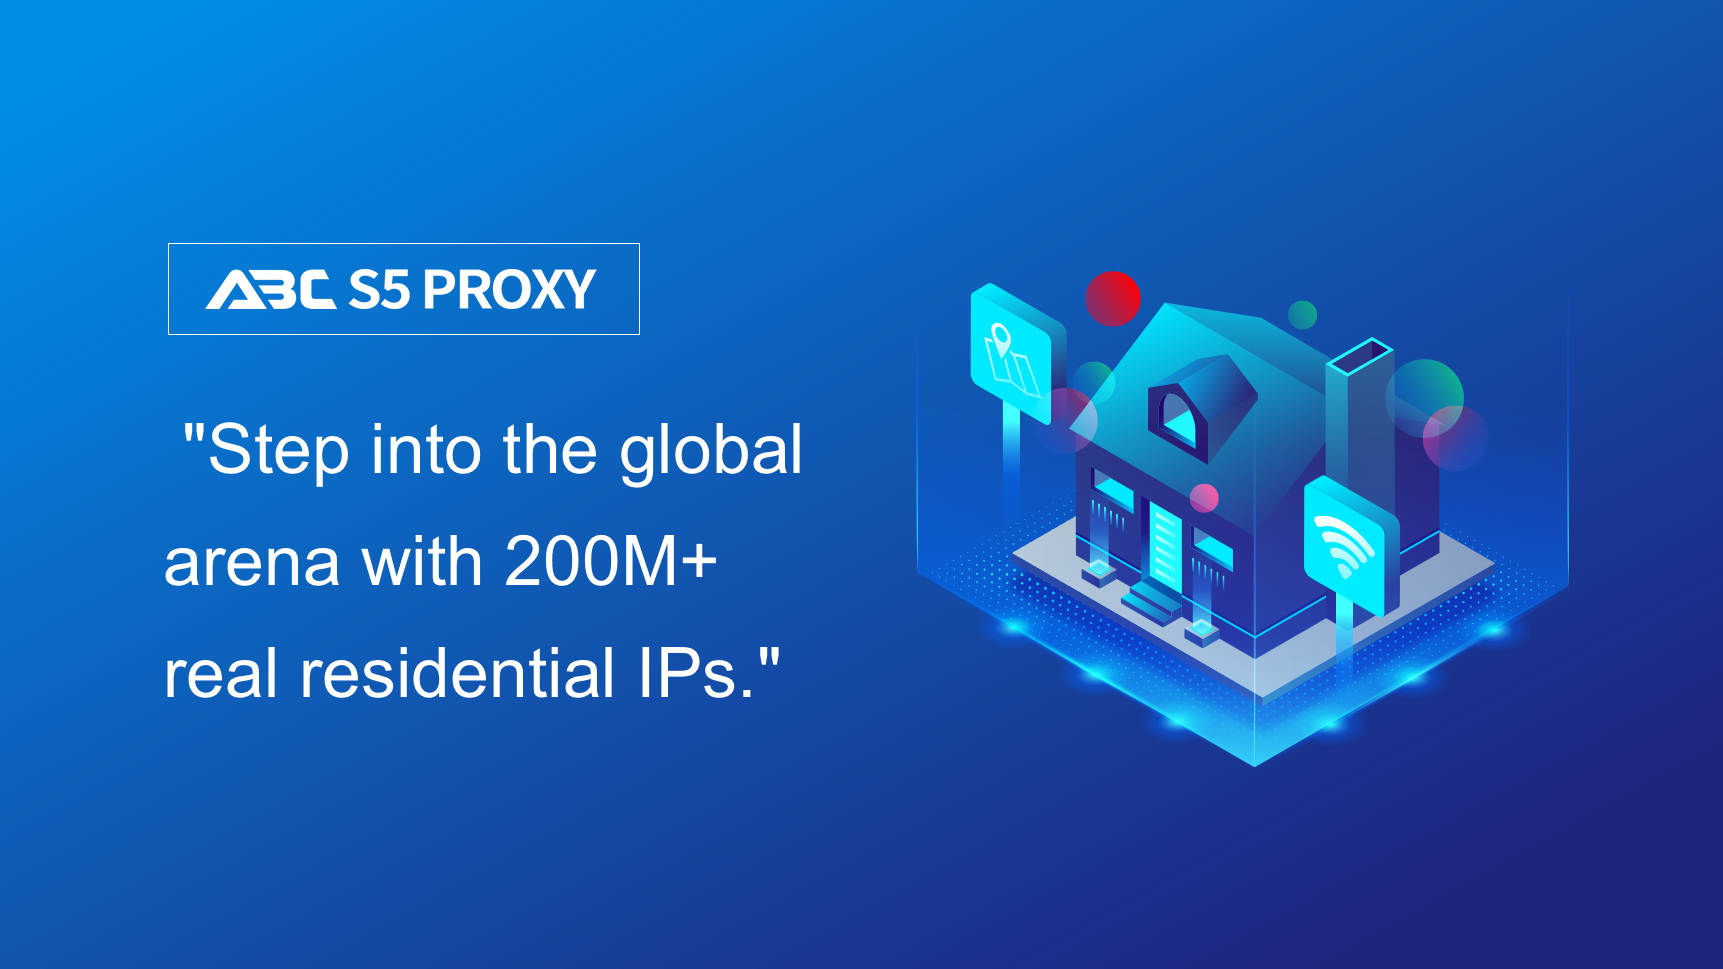 Best Residential IP Proxy? No one can refuse the world’s most cost-effective proxy service provider - ABCproxy